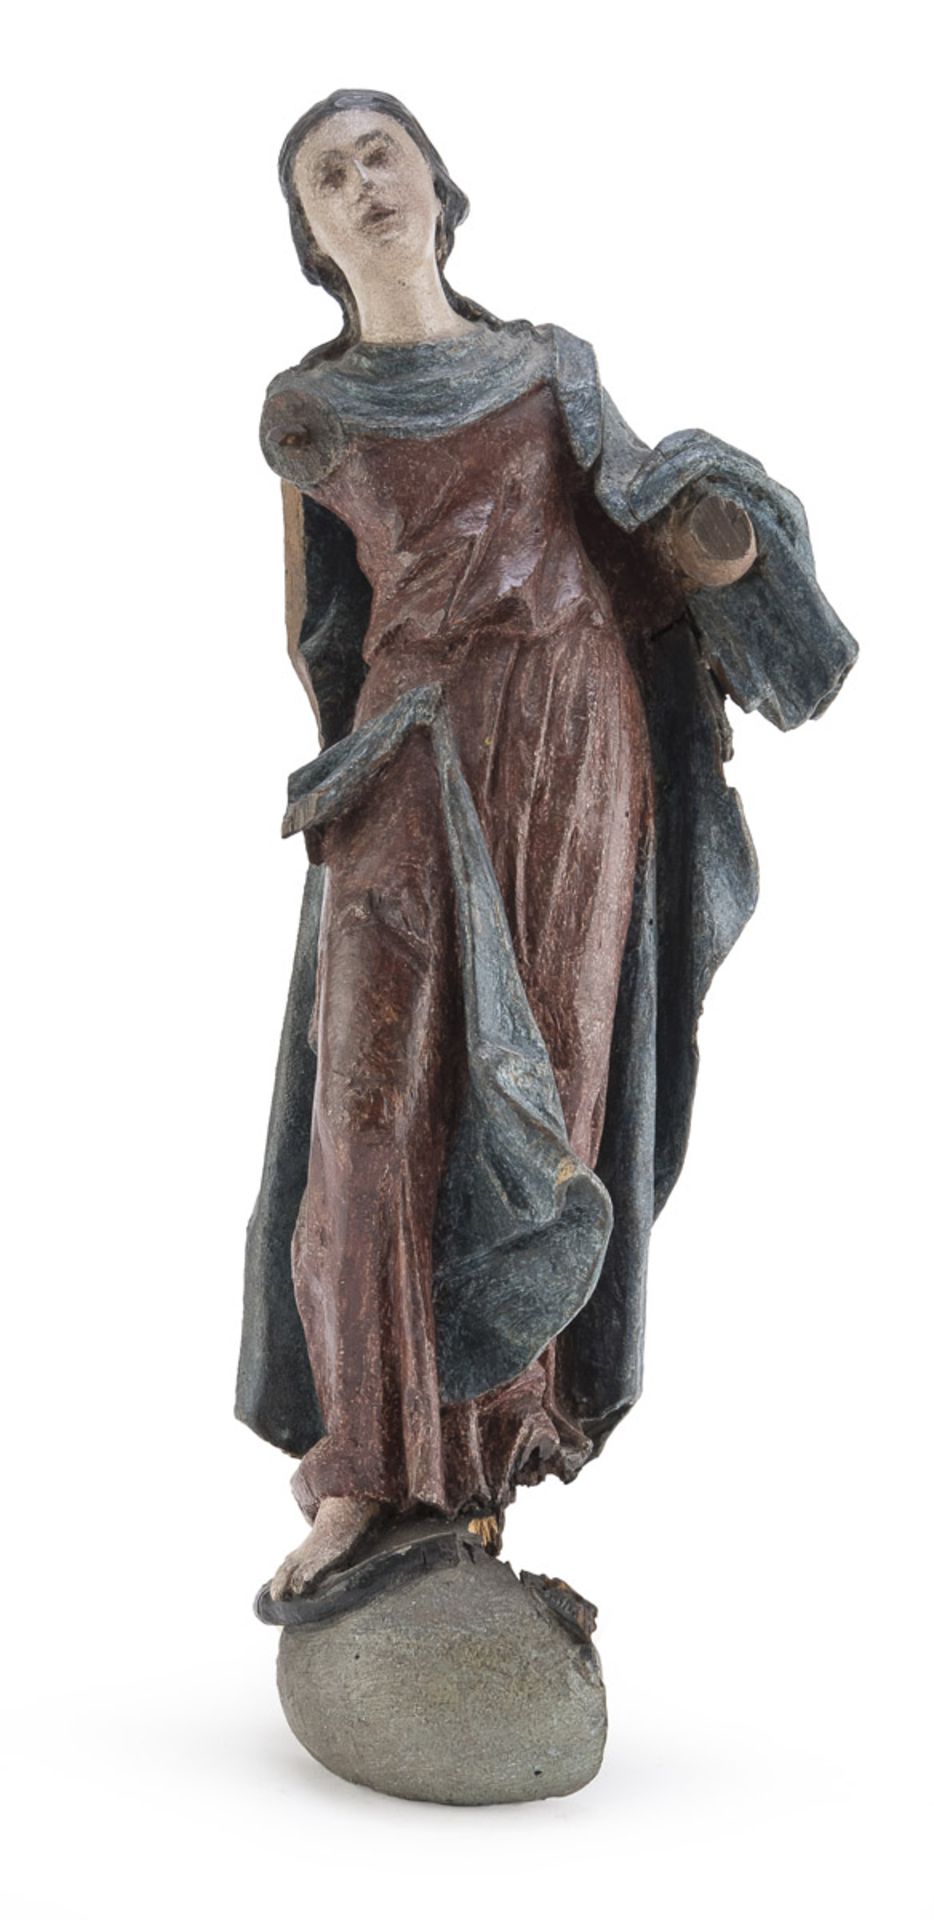 REMAIN OF SCULPTURE OF THE IMMACULATE - CENTRAL ITALY 17TH CENTURY